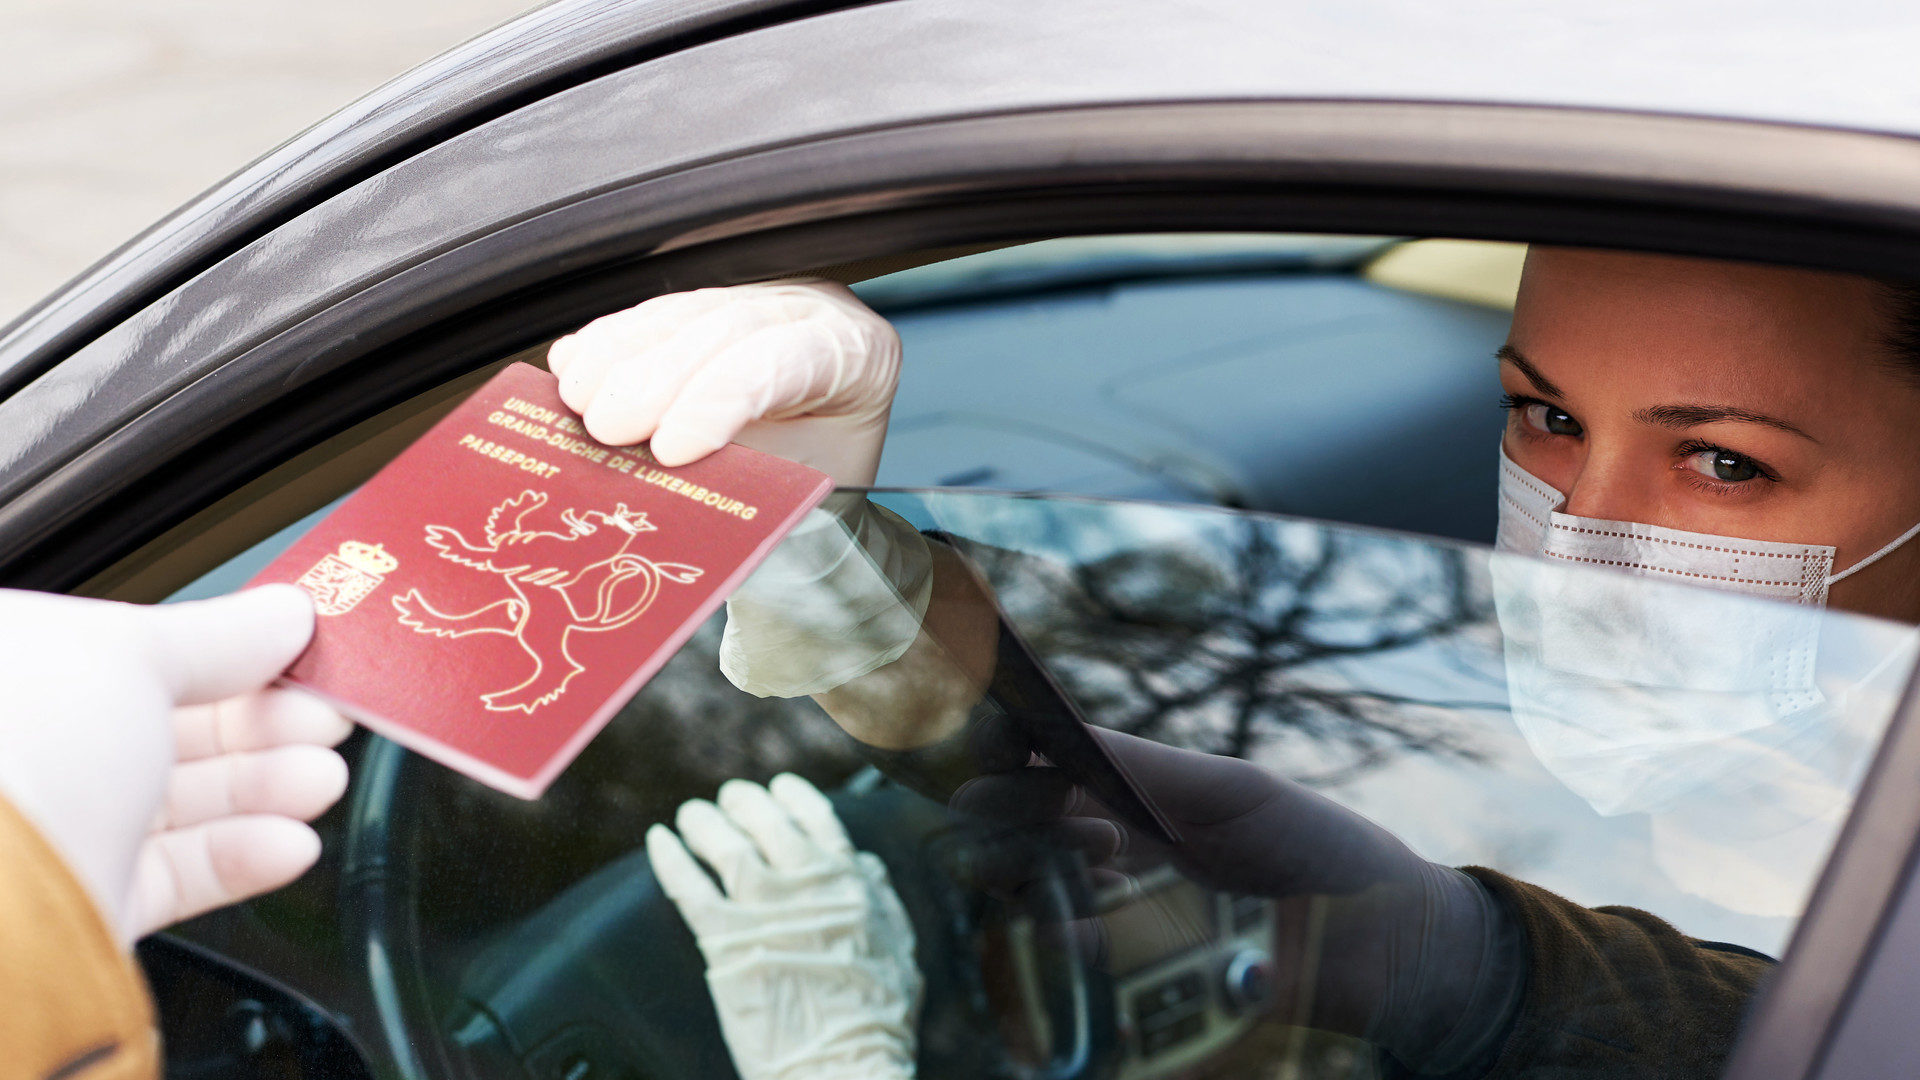 Easy Luxembourgish citizenship drive through